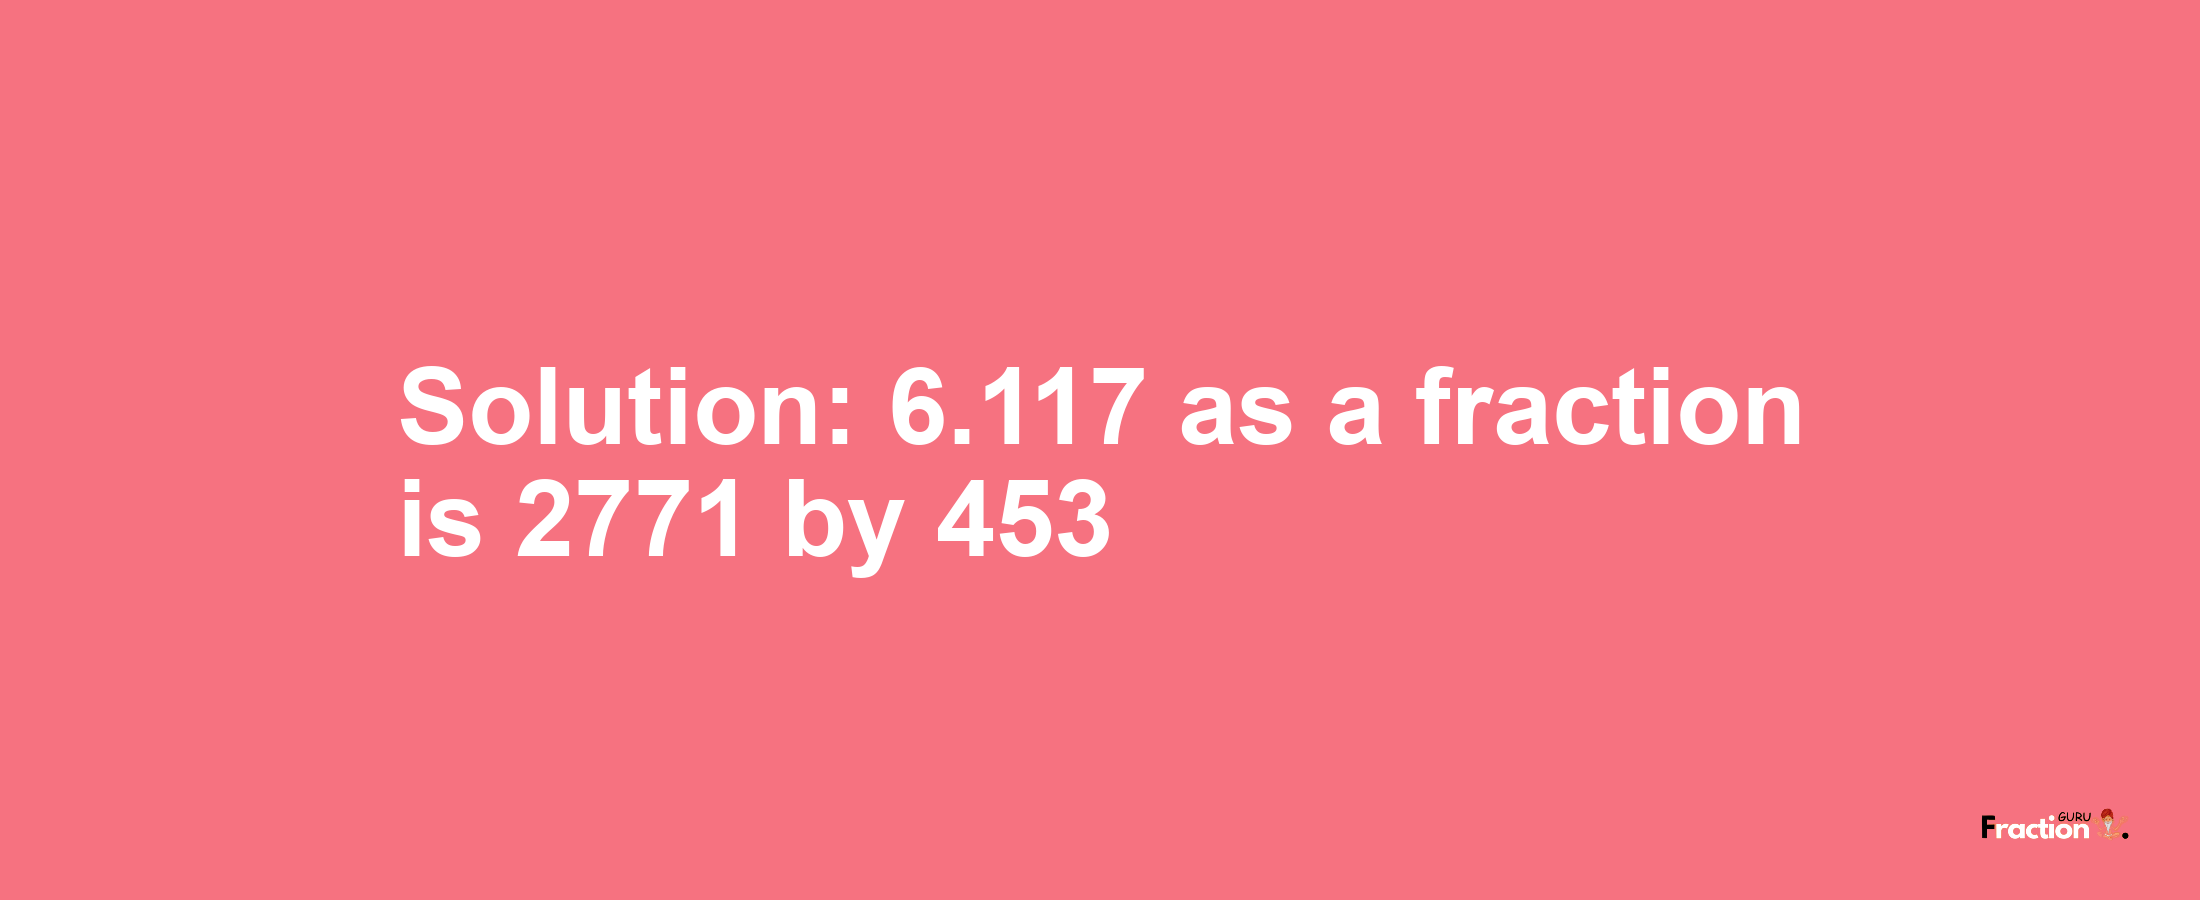 Solution:6.117 as a fraction is 2771/453